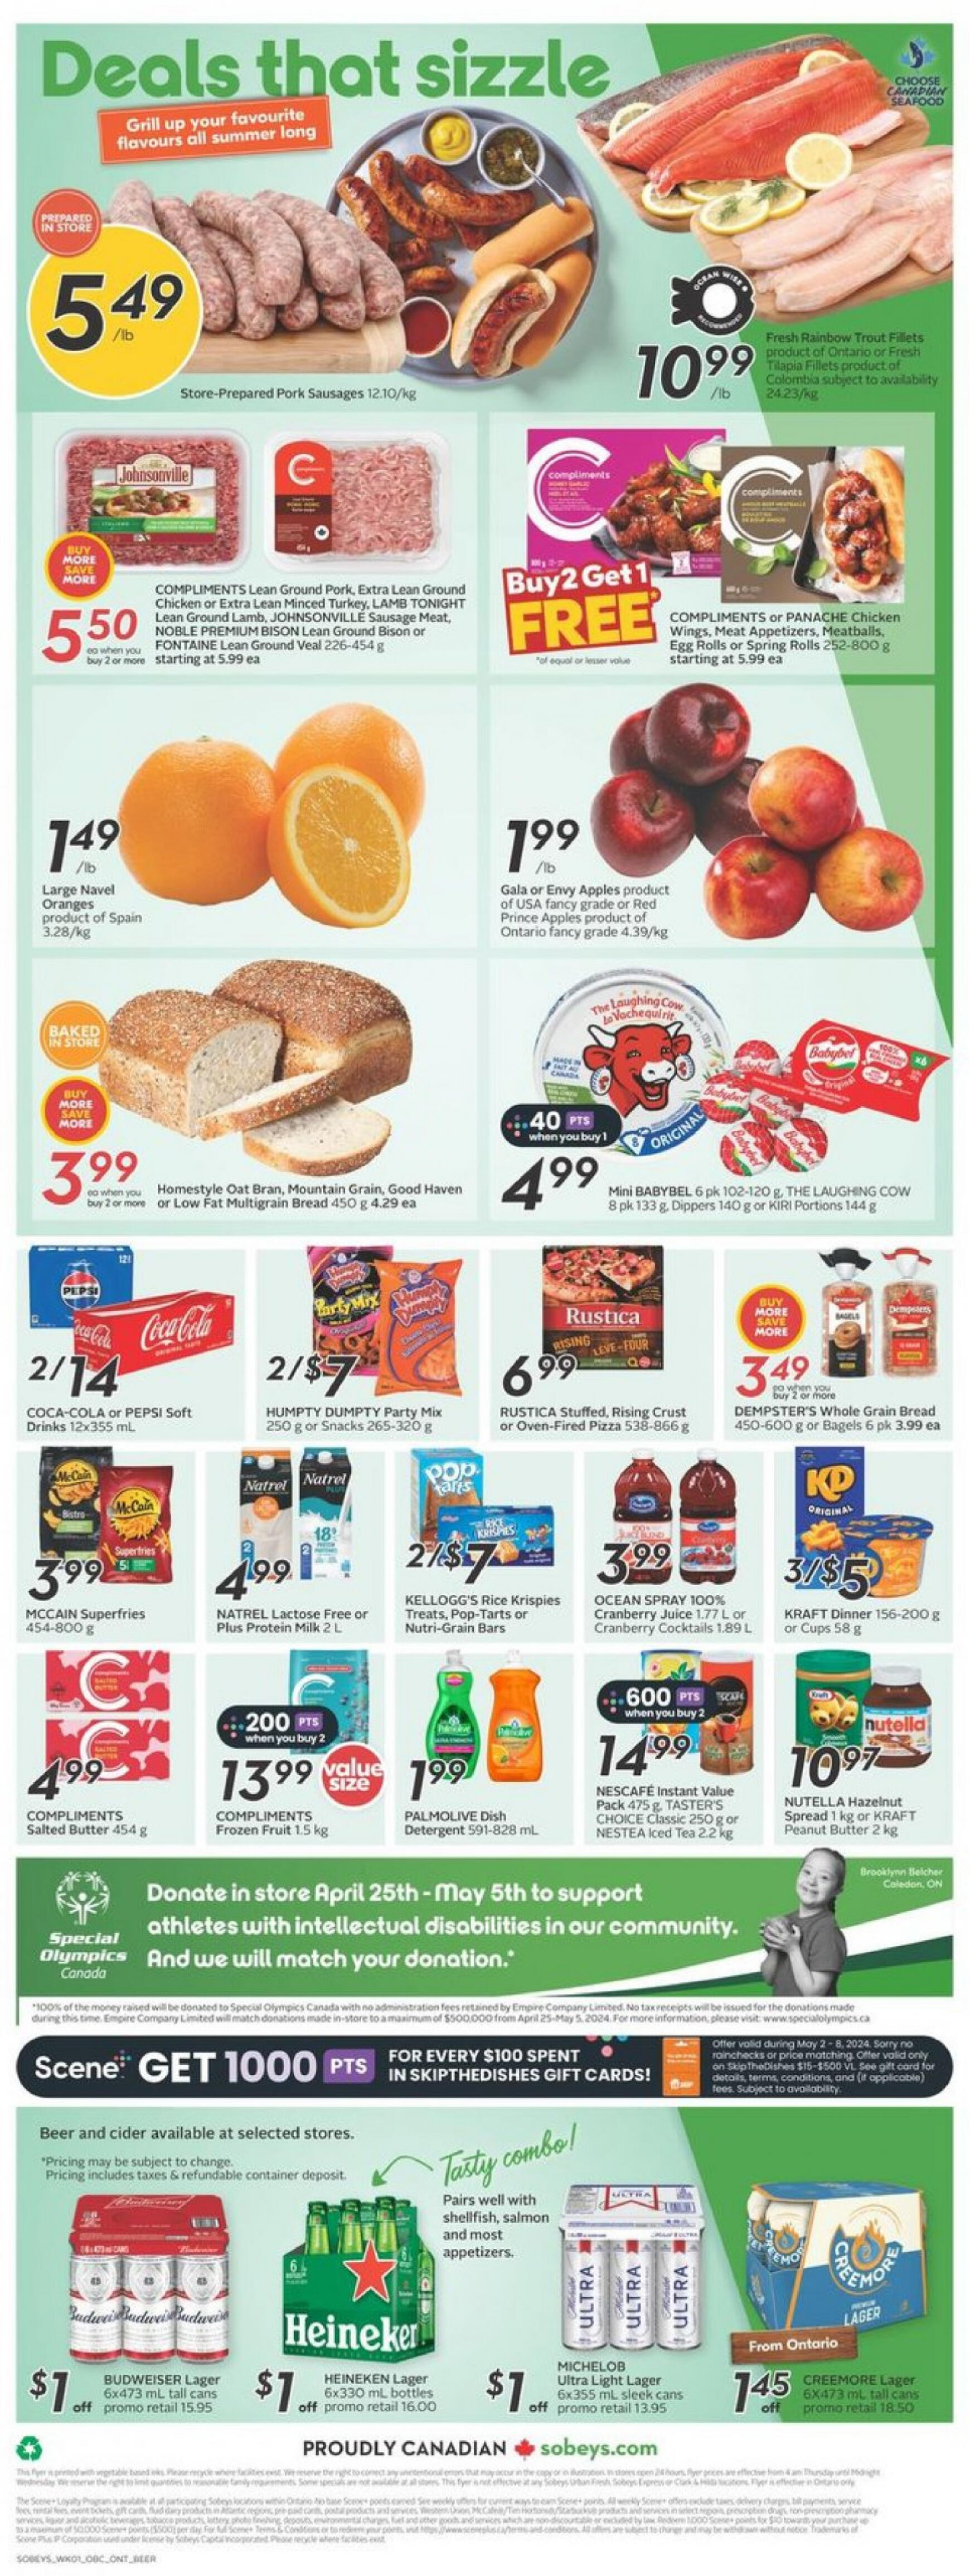 sobeys - Sobeys - Weekly Flyer - Ontario flyer current 02.05. - 08.05. - page: 4